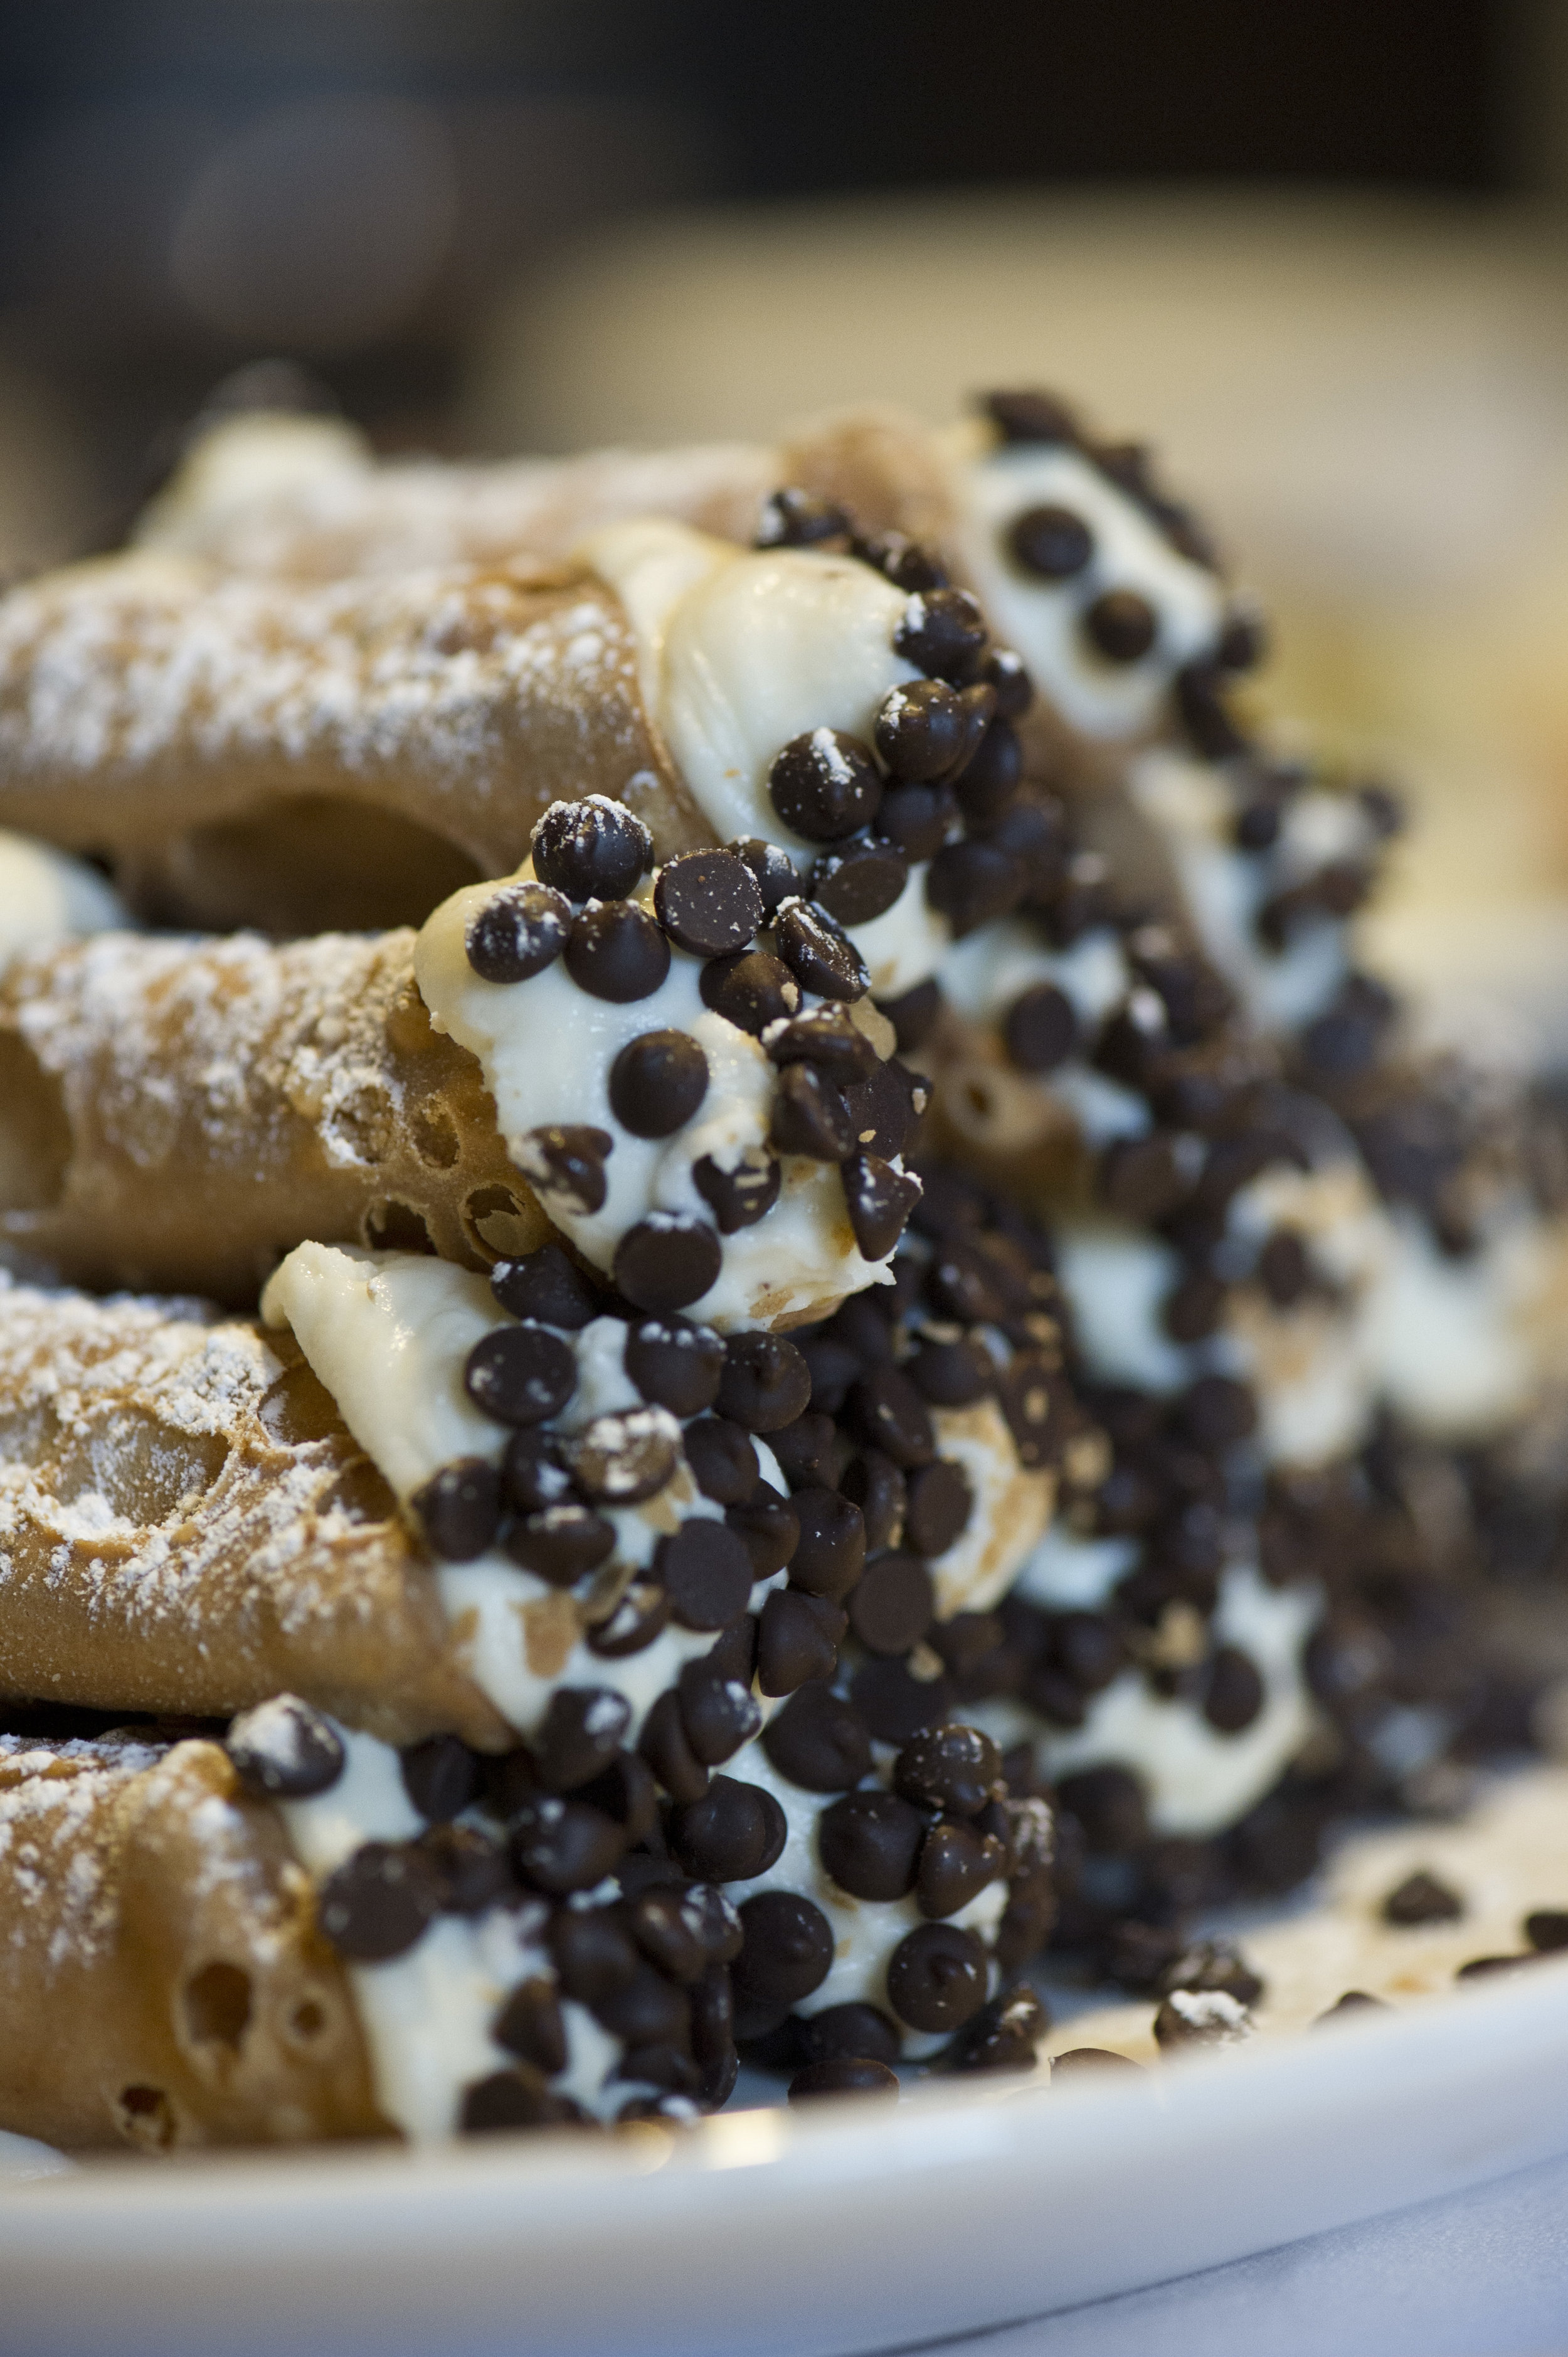 Impress your guests with Cannoli